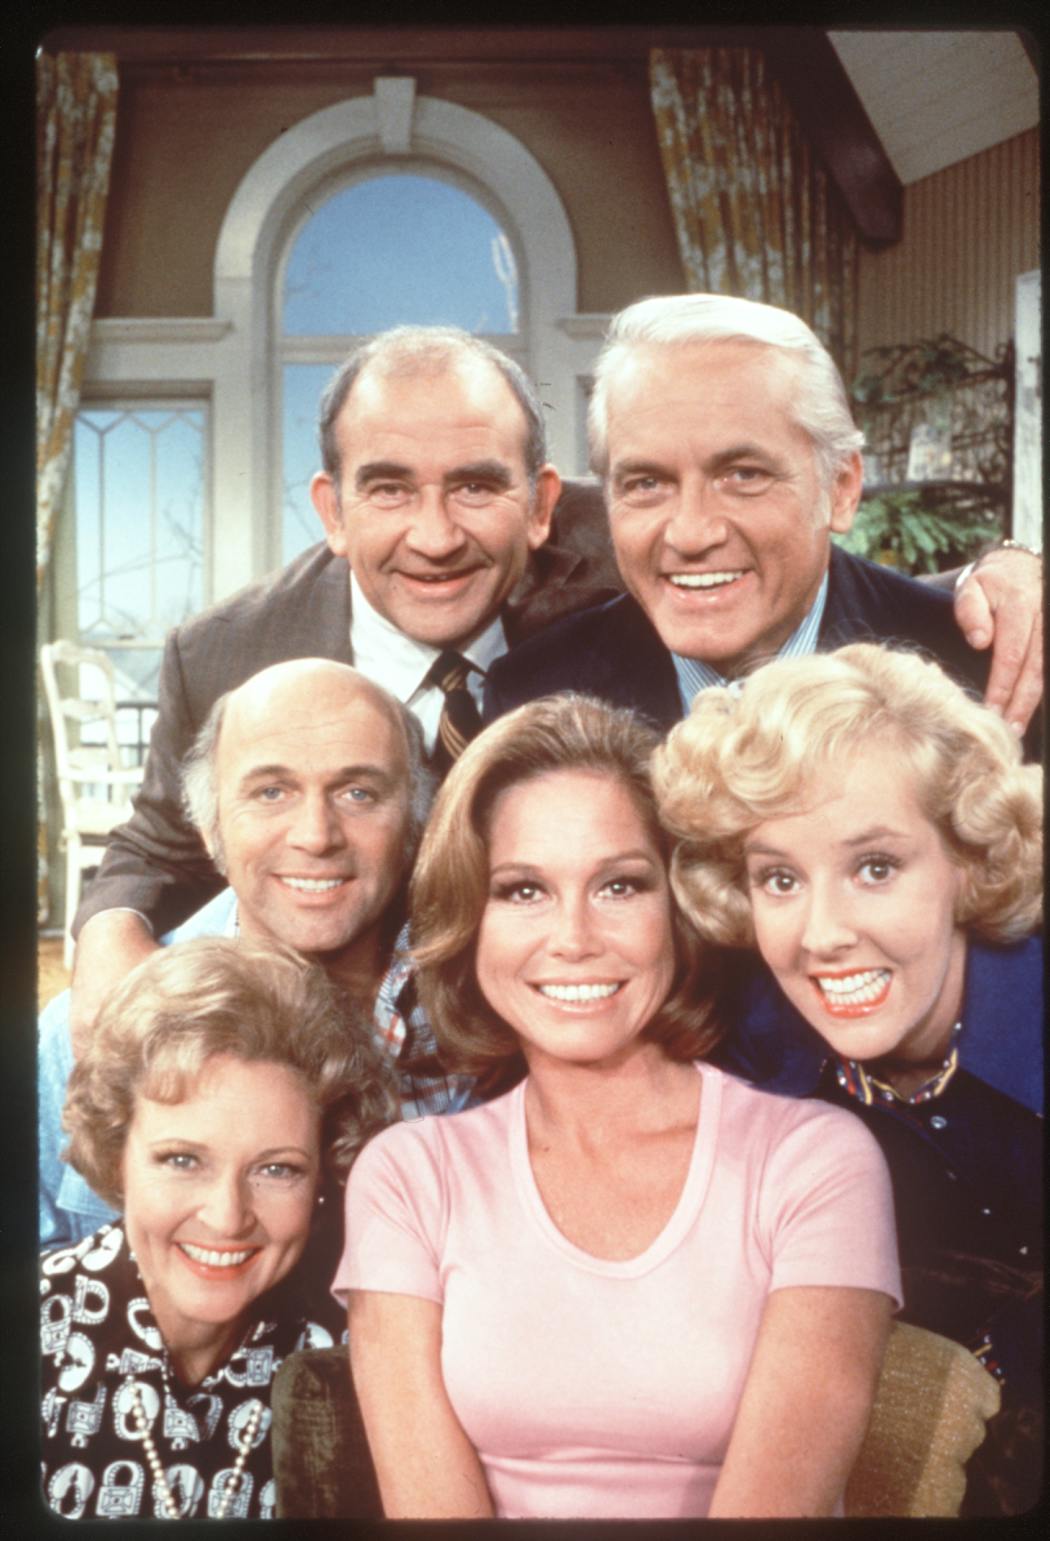 Clockwise from lower left: Betty White, Gavin MacLeod, Ed Asner, Ted Knight, Georgia Engel and Mary Tyler Moore.